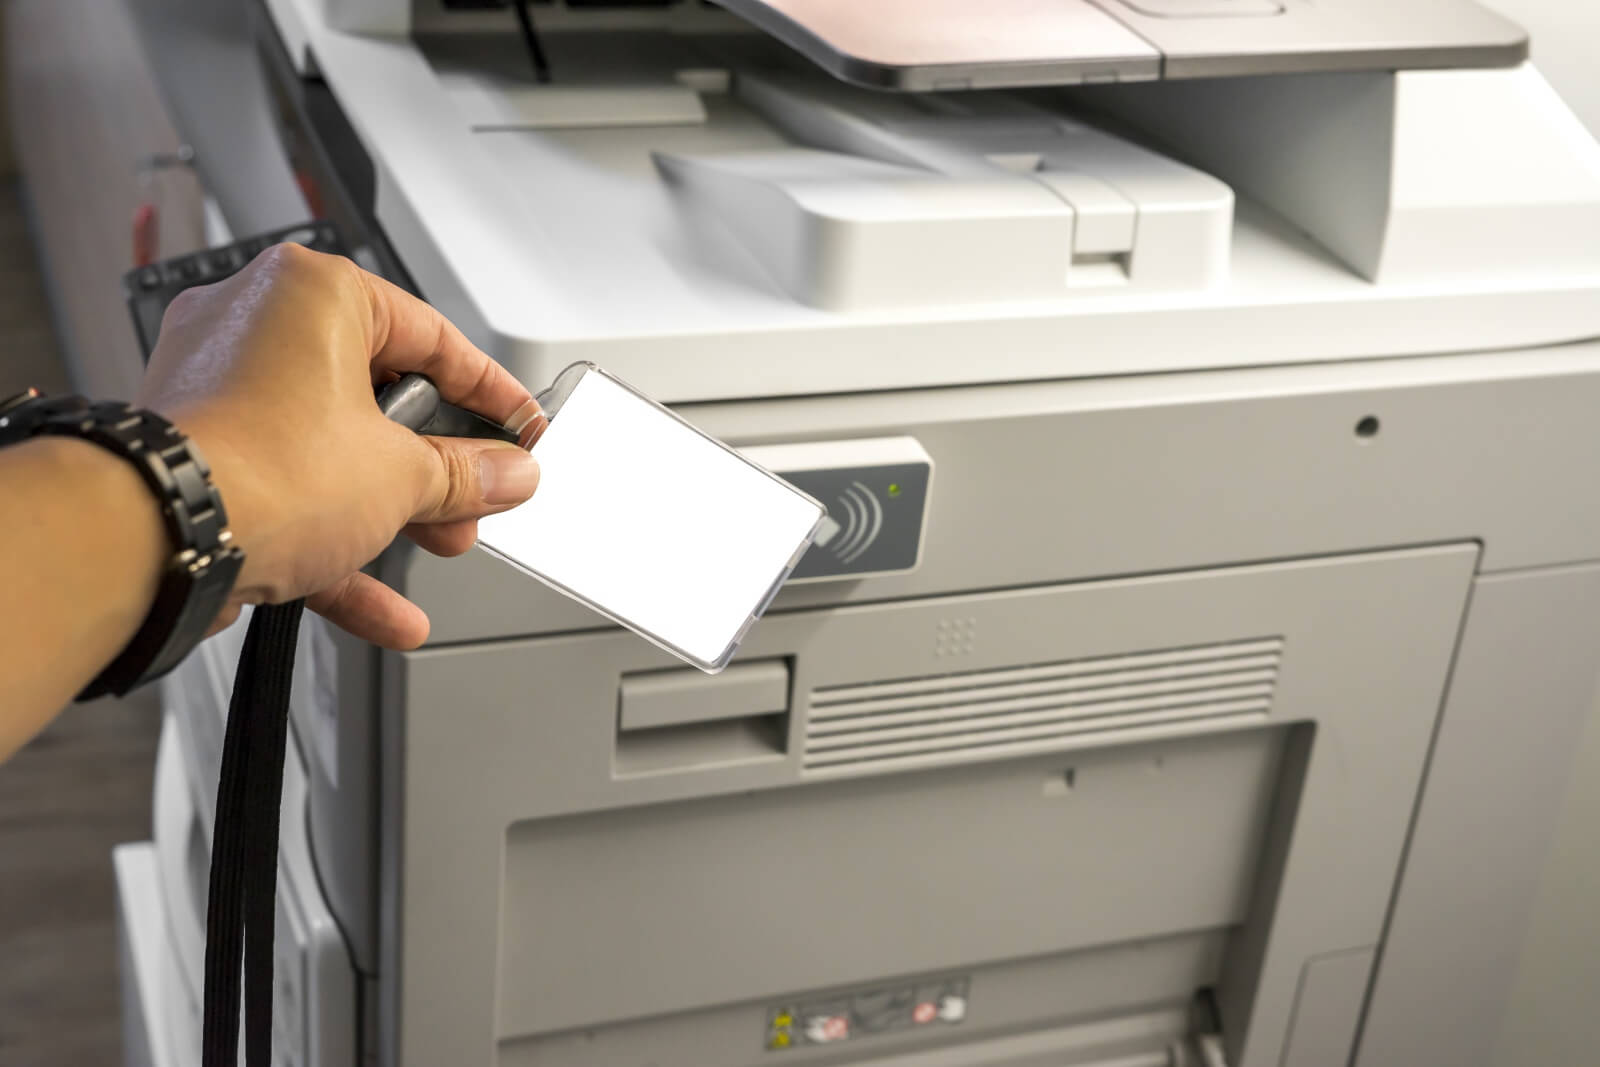 Office worker scans ID for secure printing